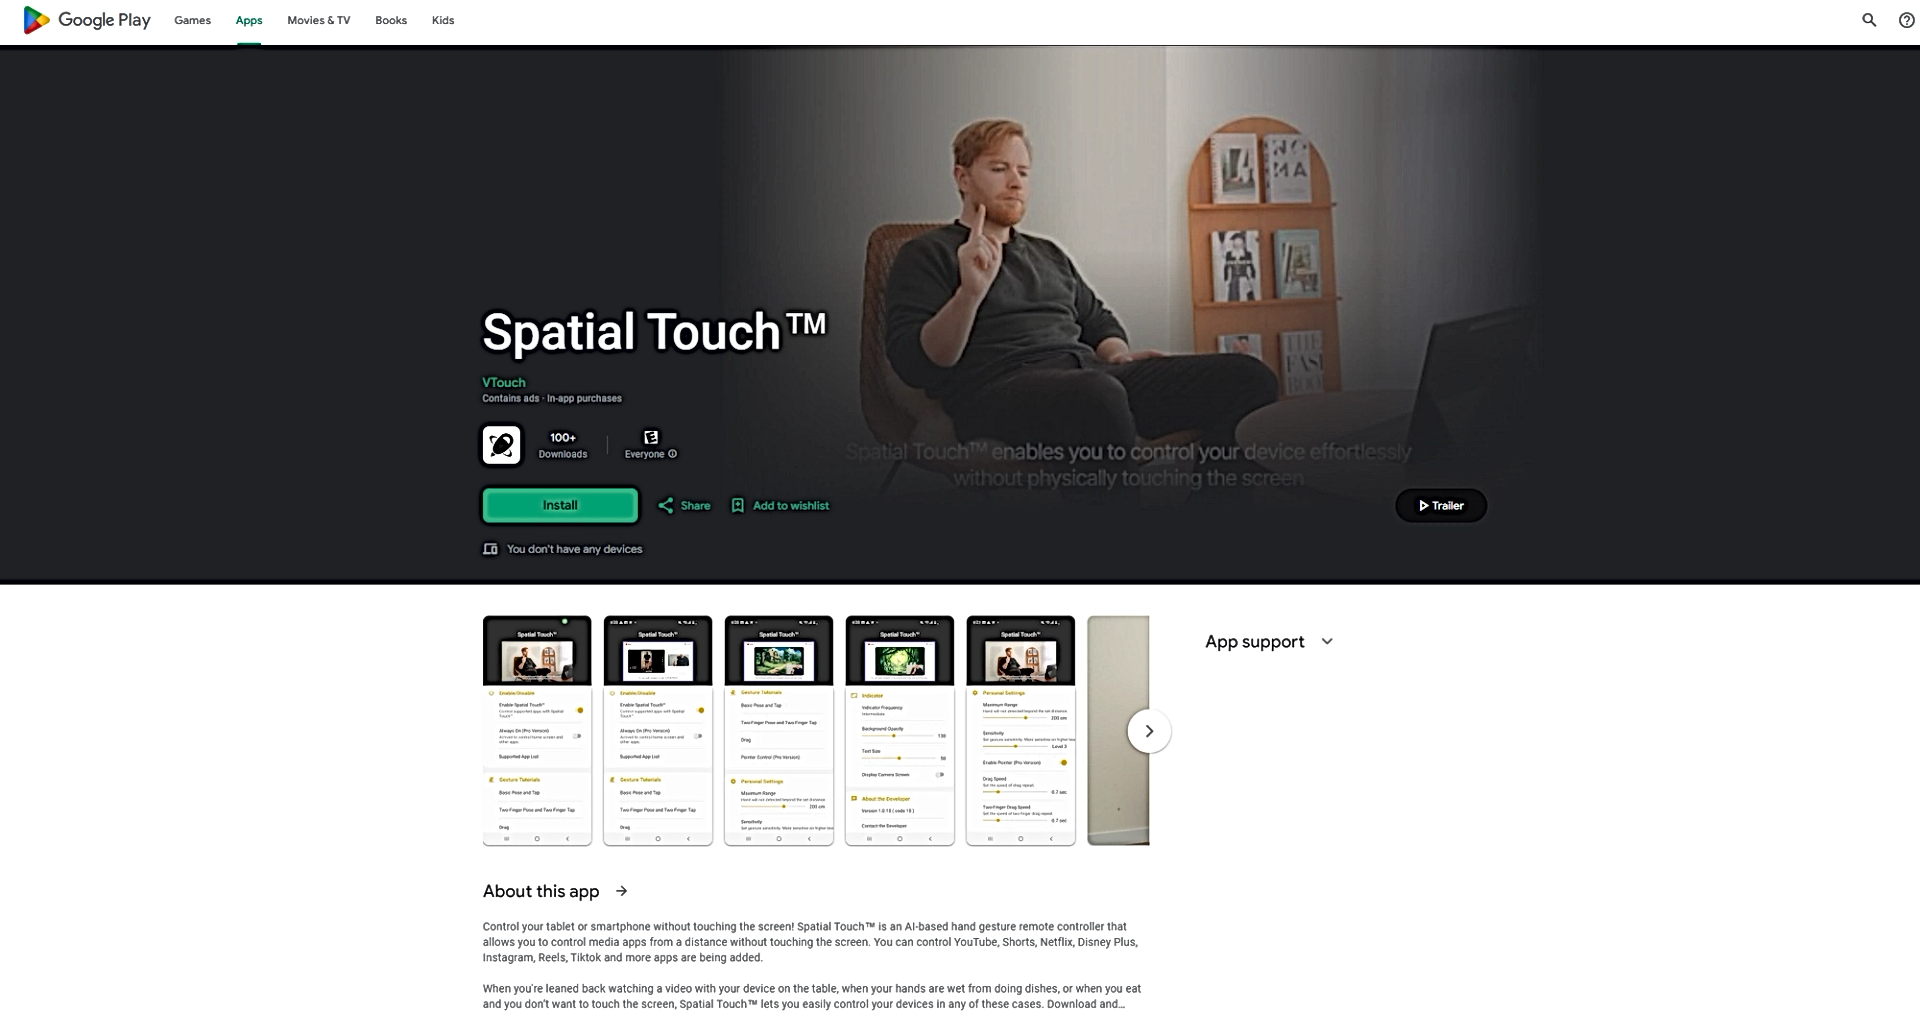 Spatial Touch featured